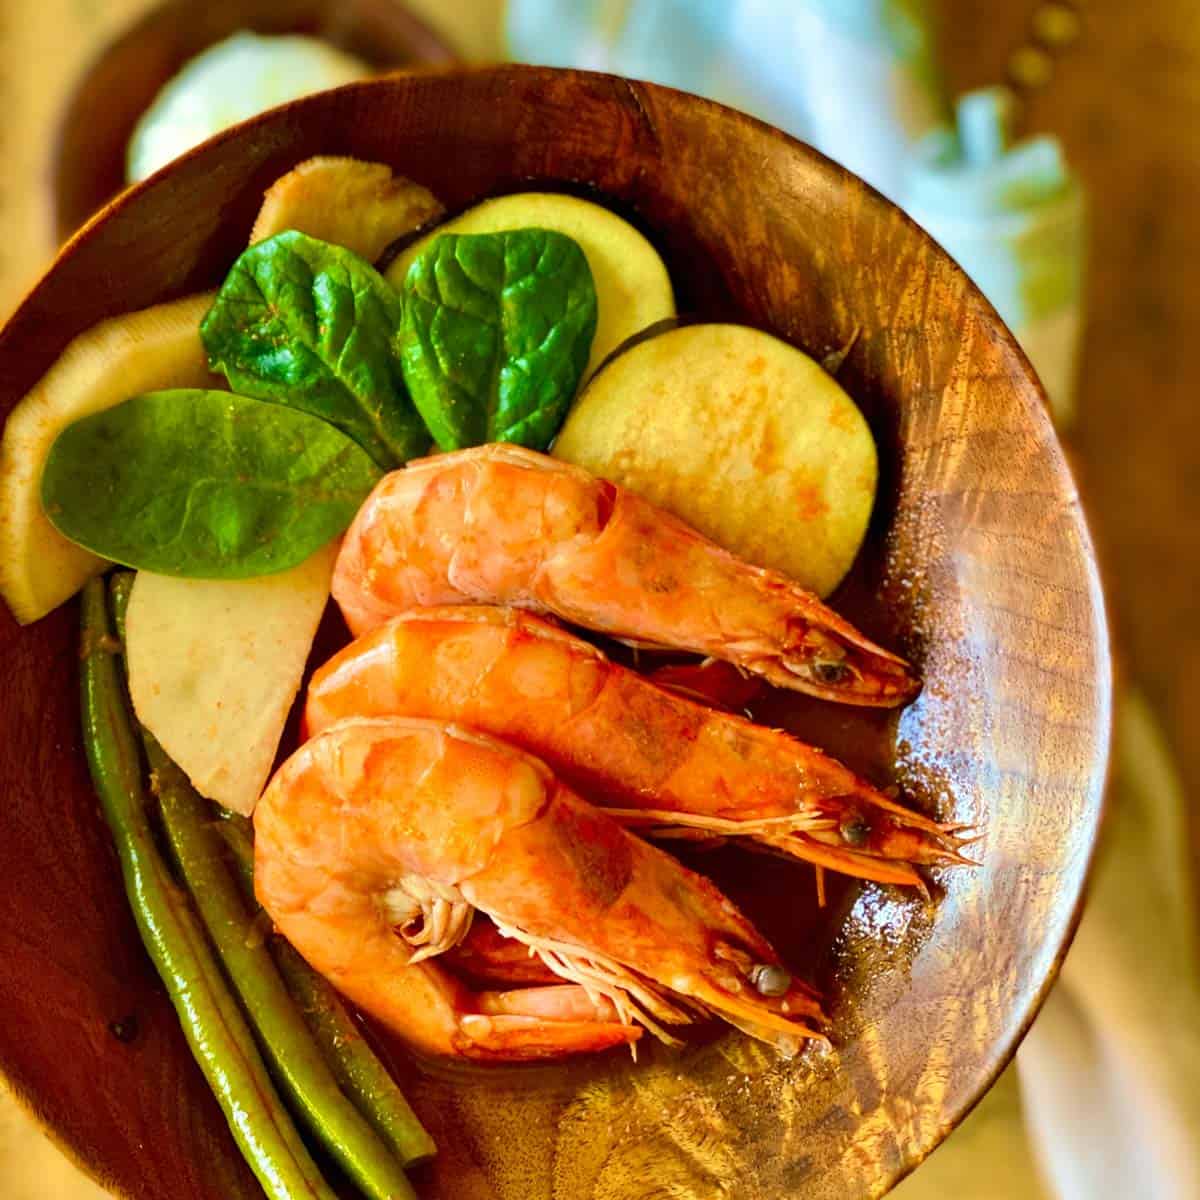 Shrimp sinigang with vegetables on a wooden bowl.